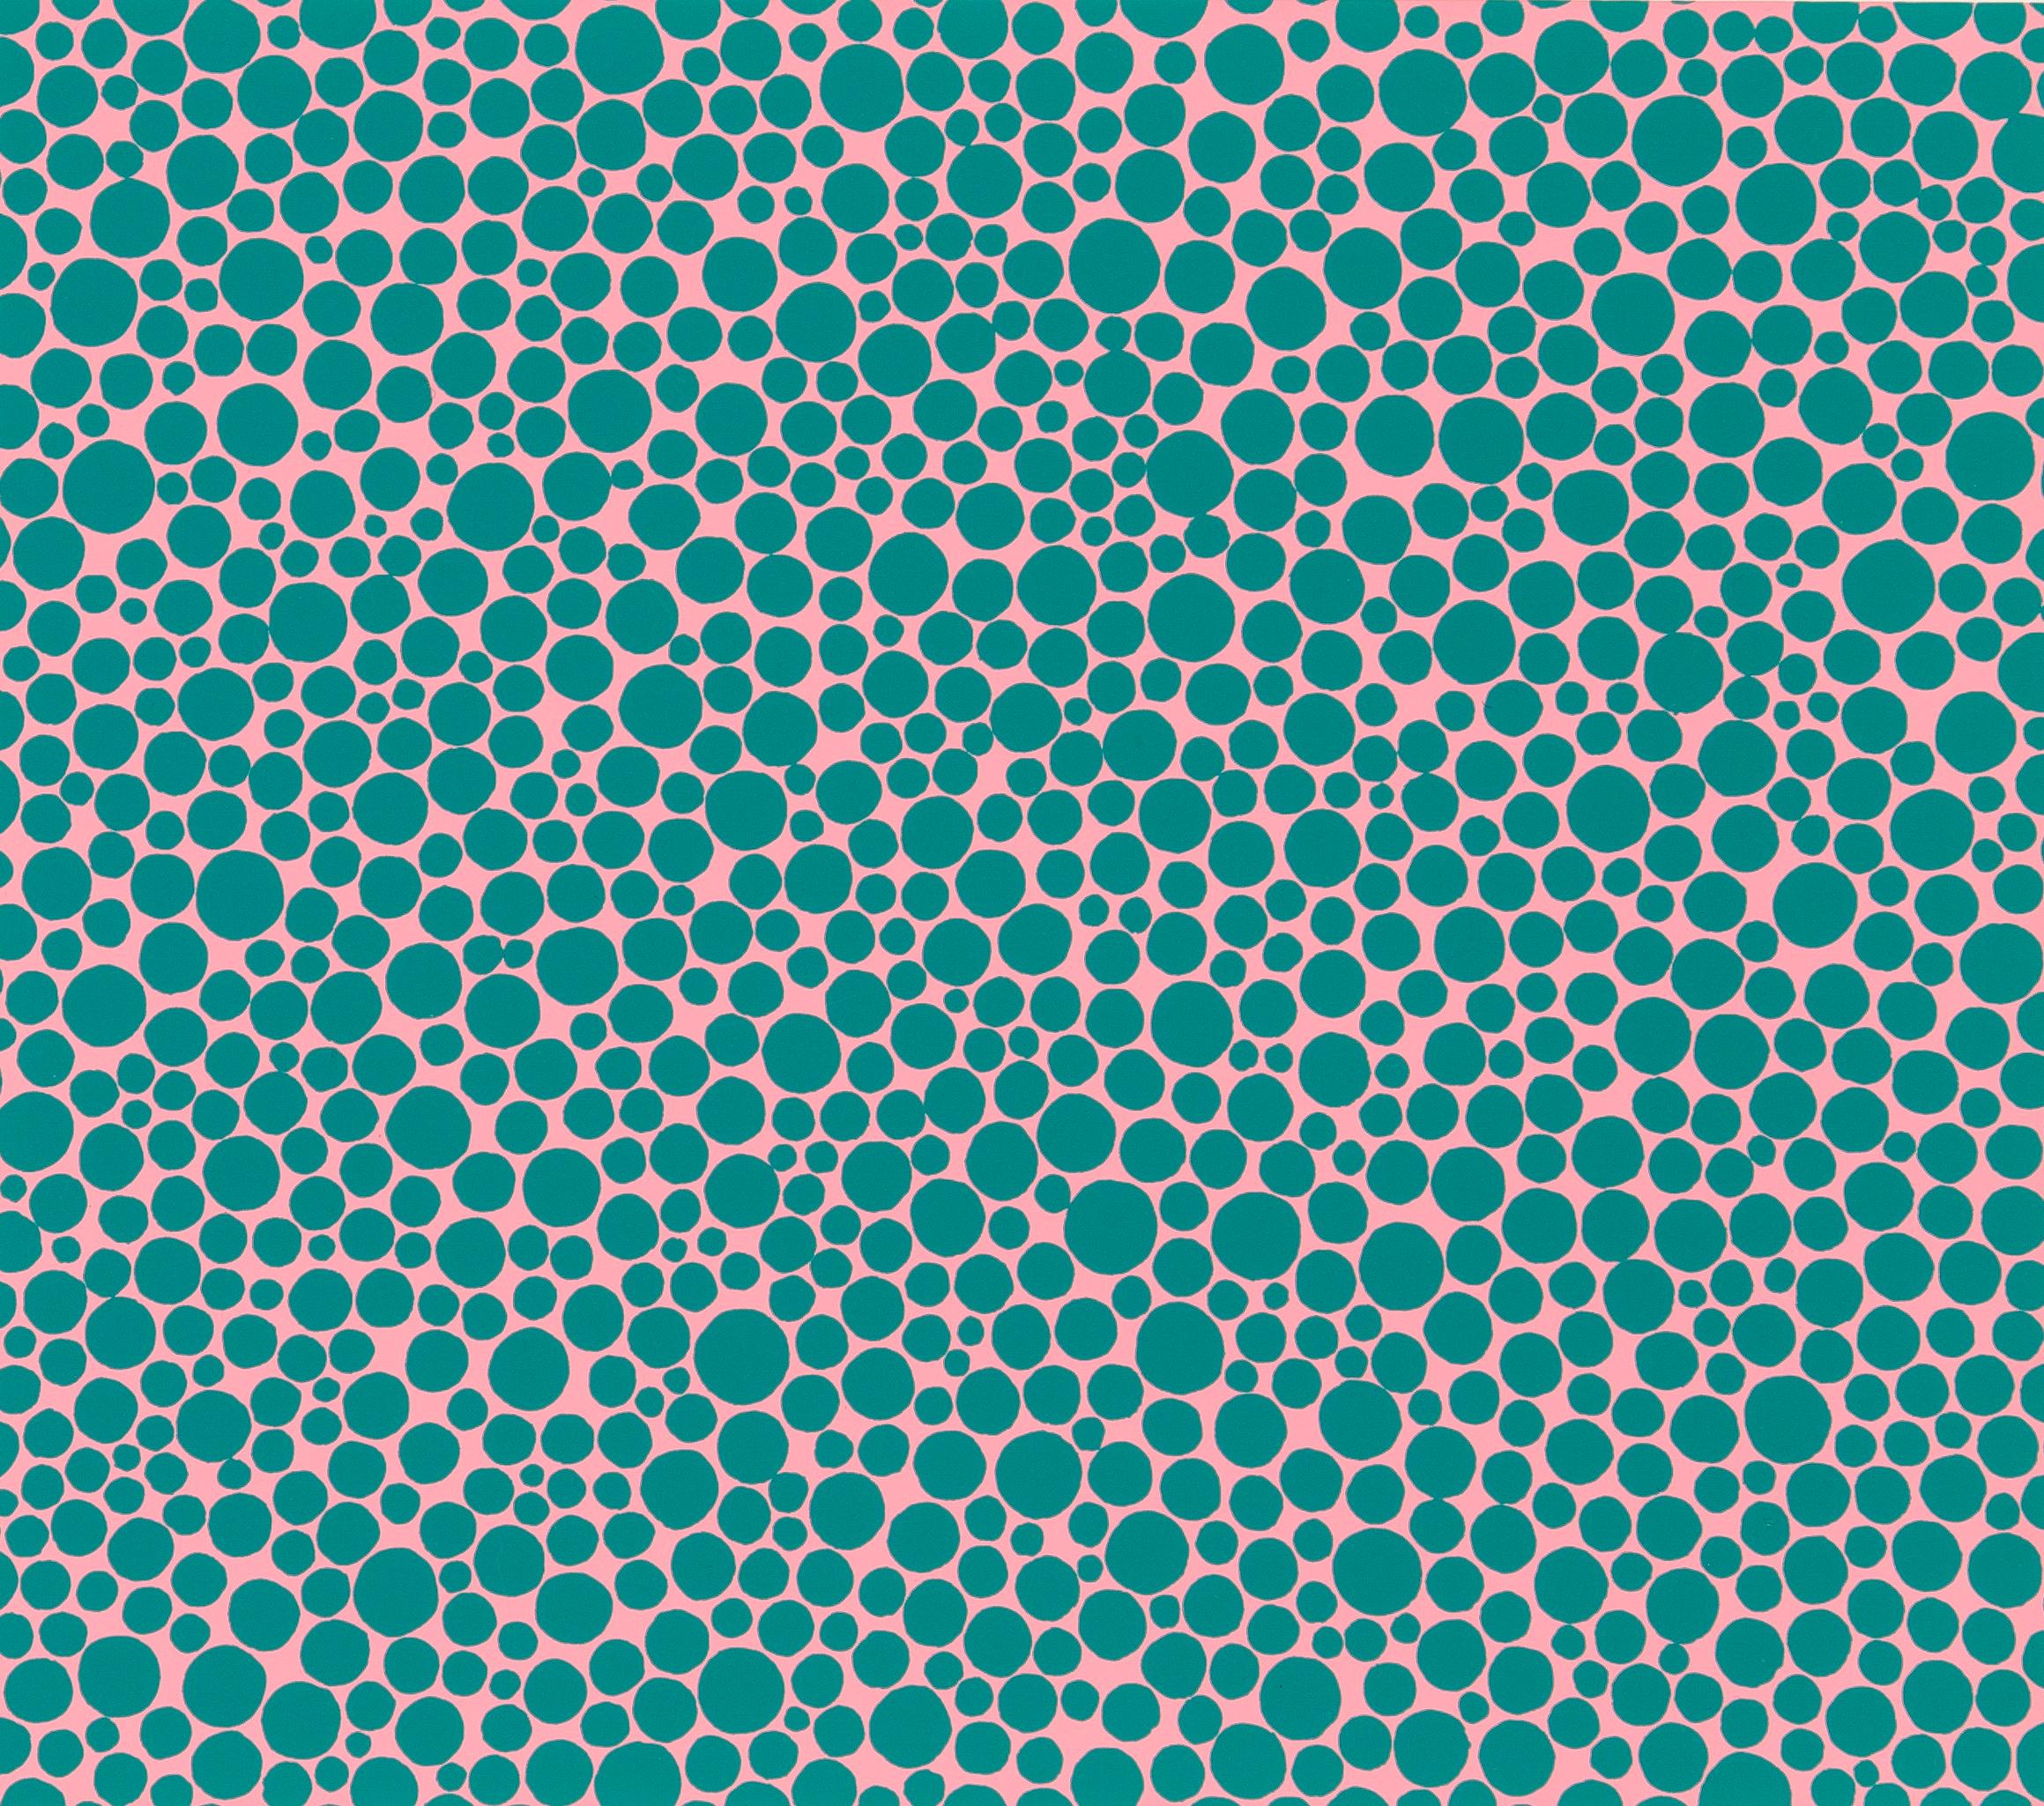 Yayoi Kusama 
Dots Infinity (1986). Edition 57/100
Screenprint
[2 screens, 2 colors]
Signed, titled, dated and numbered 53/100 in pencil by the artist
28 x 32 cm [11 ¹/₃₂ x 12 ¹⁹/₃₂ in]  (image) 
51.5 x 36.4 cm [20 ⁹/₃₂ x 14 ²¹/₆₄ in]